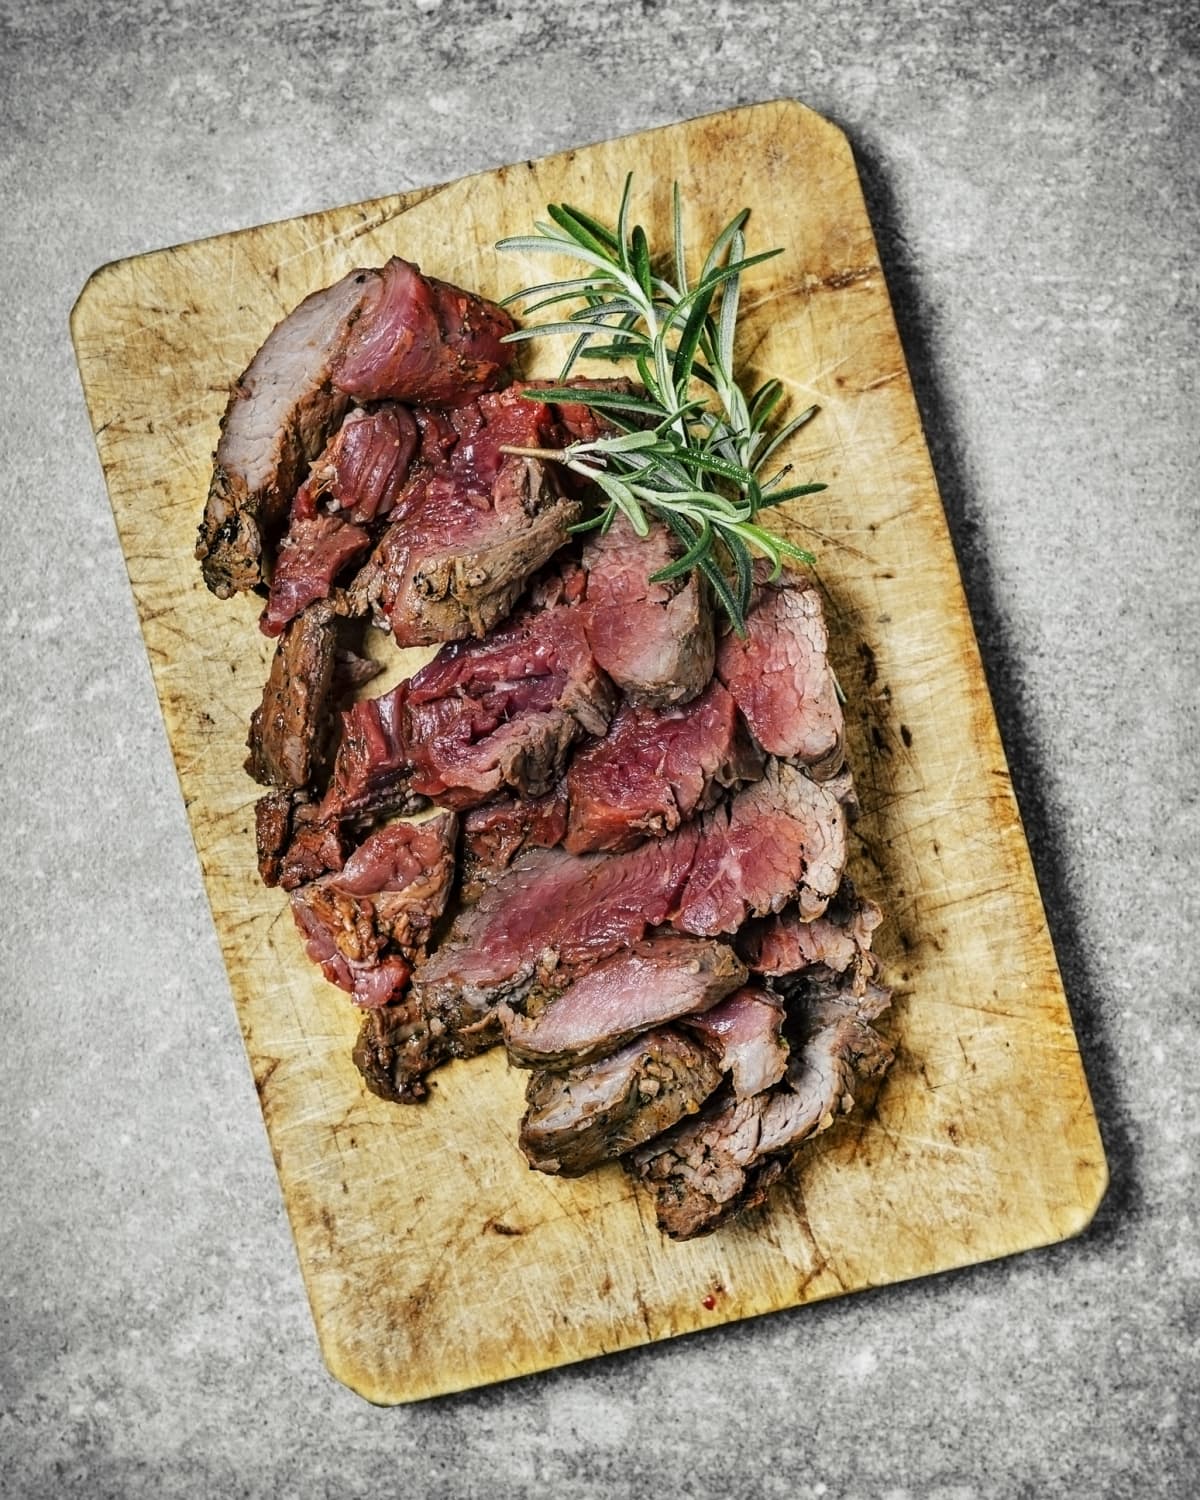 Cut steak on a plate on a wooden cutting board background